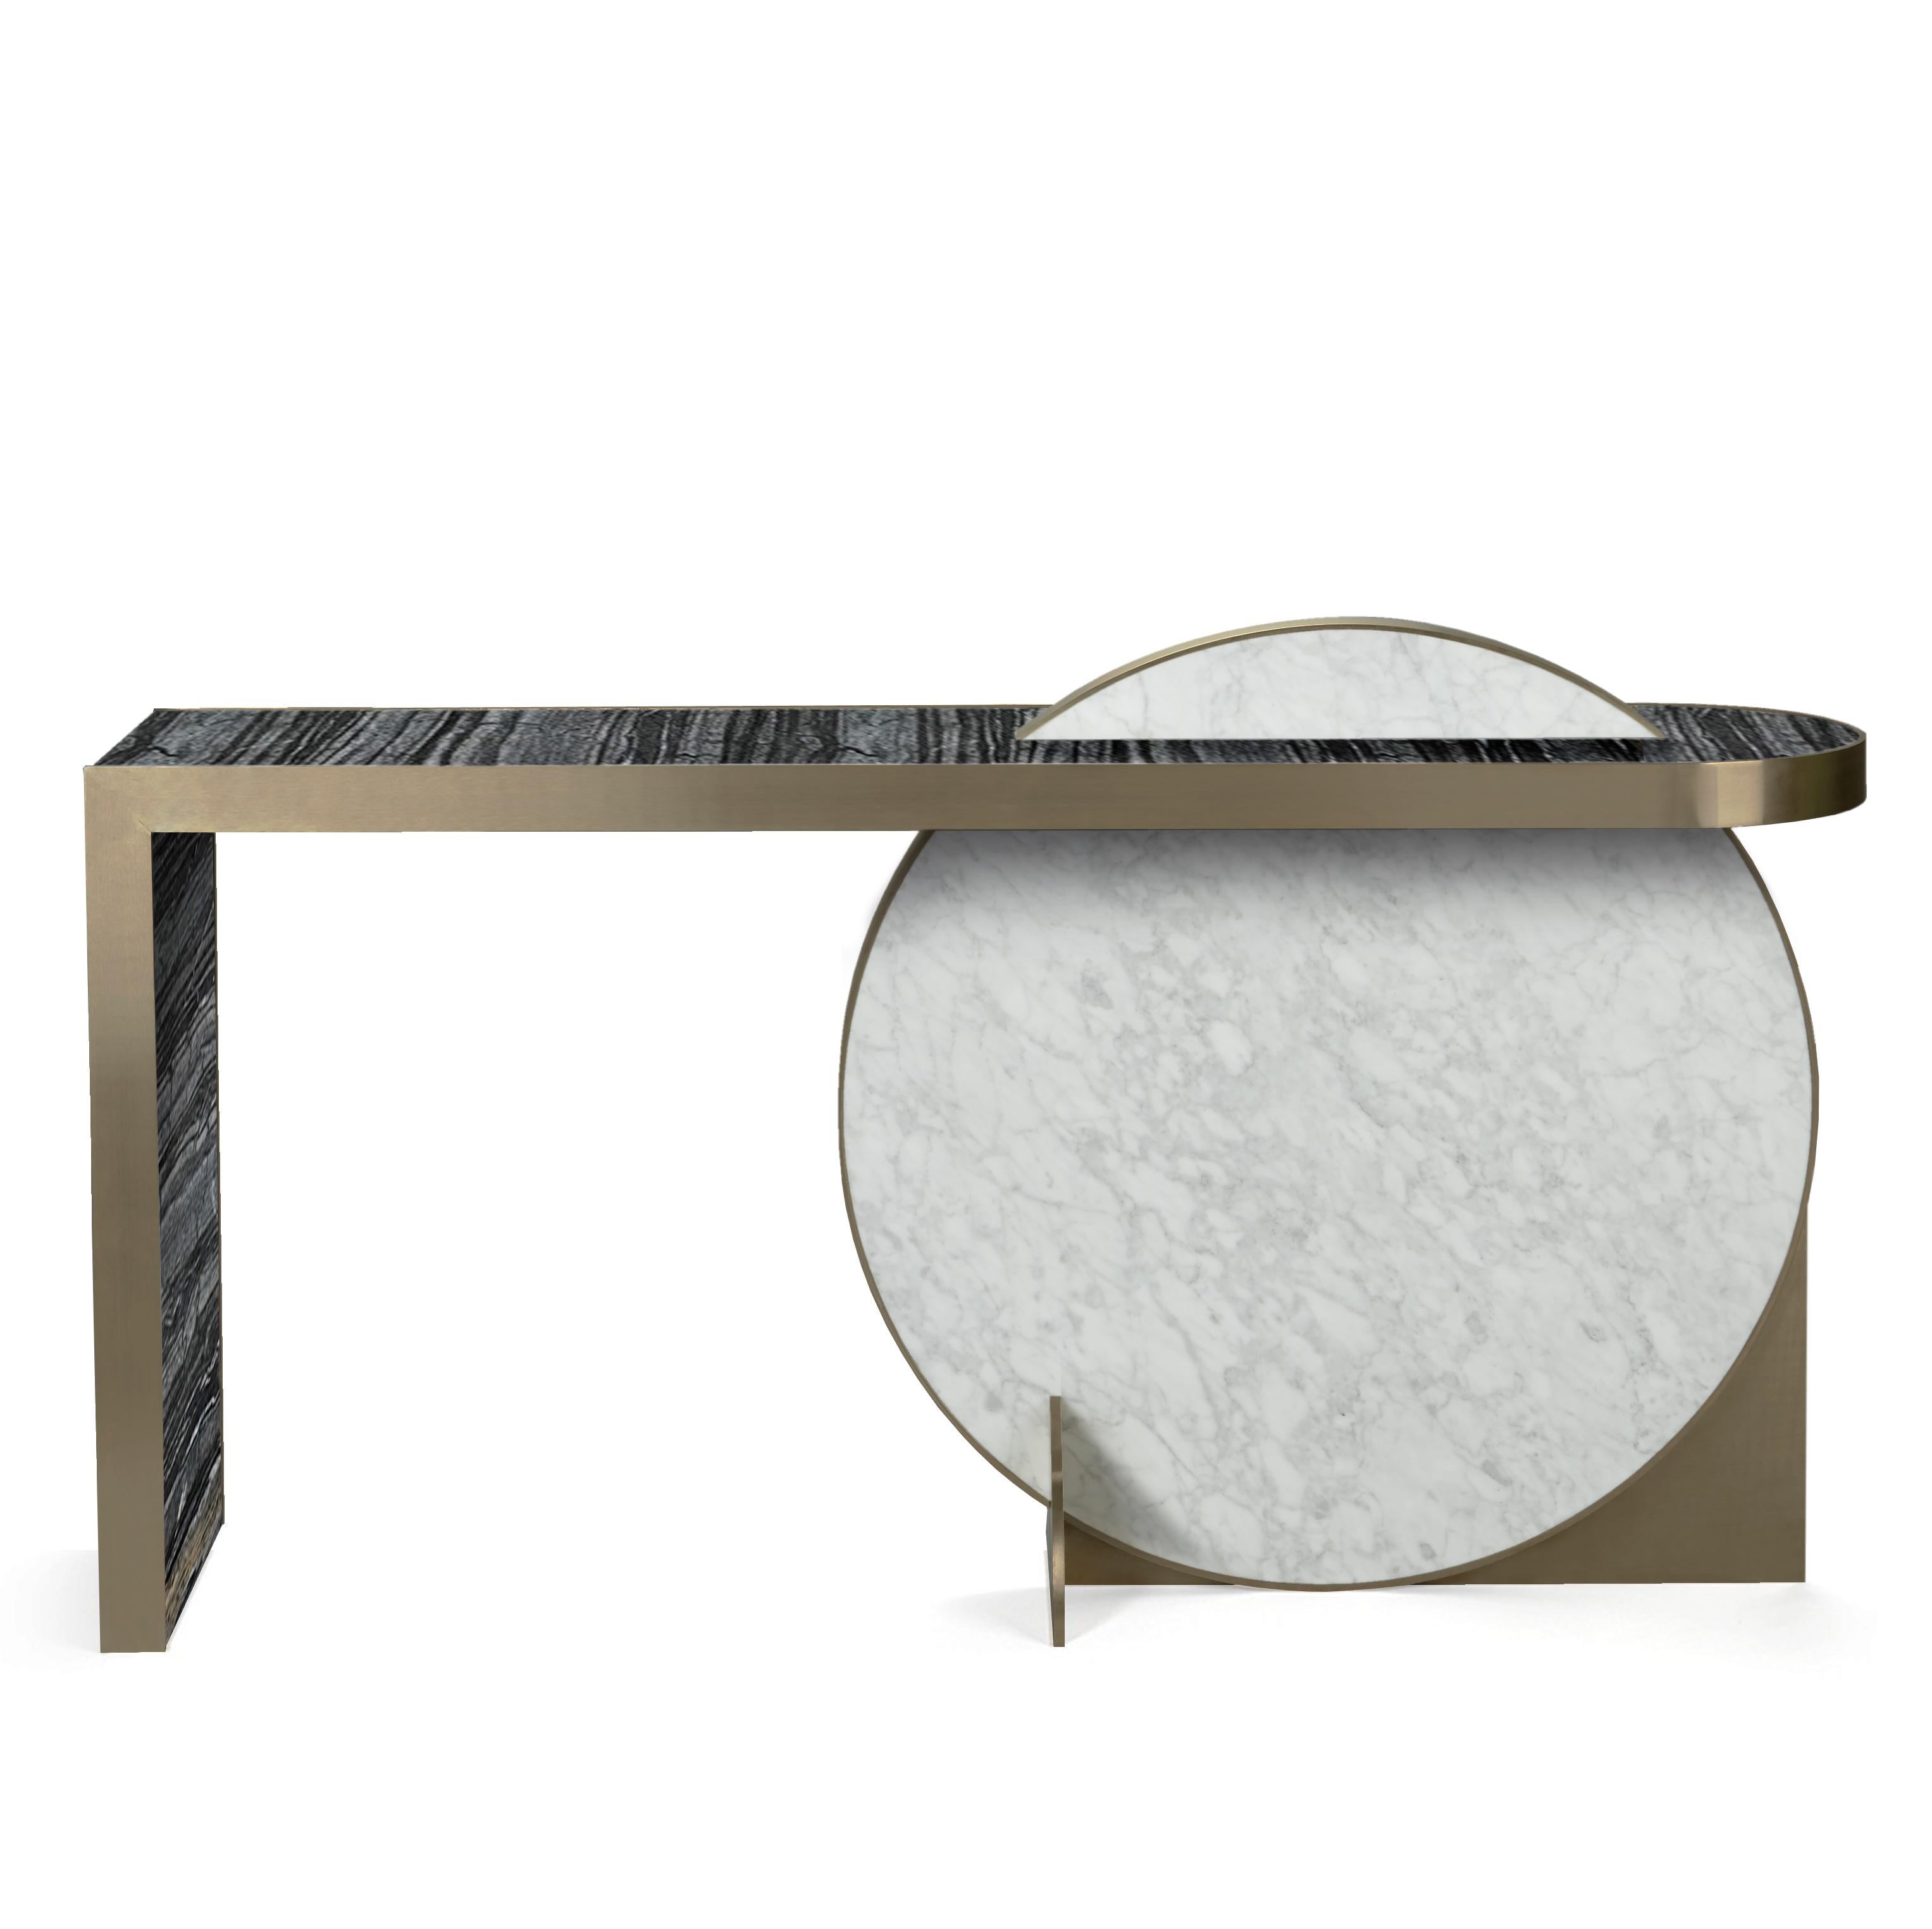 Collision console designed by Lara Bohinc for Bohinc Studio. The disk shape of this piece is inspired by the planets as part of the Lunar collection. The table is dynamically constructed using marble and brass revealing a refined luxury that